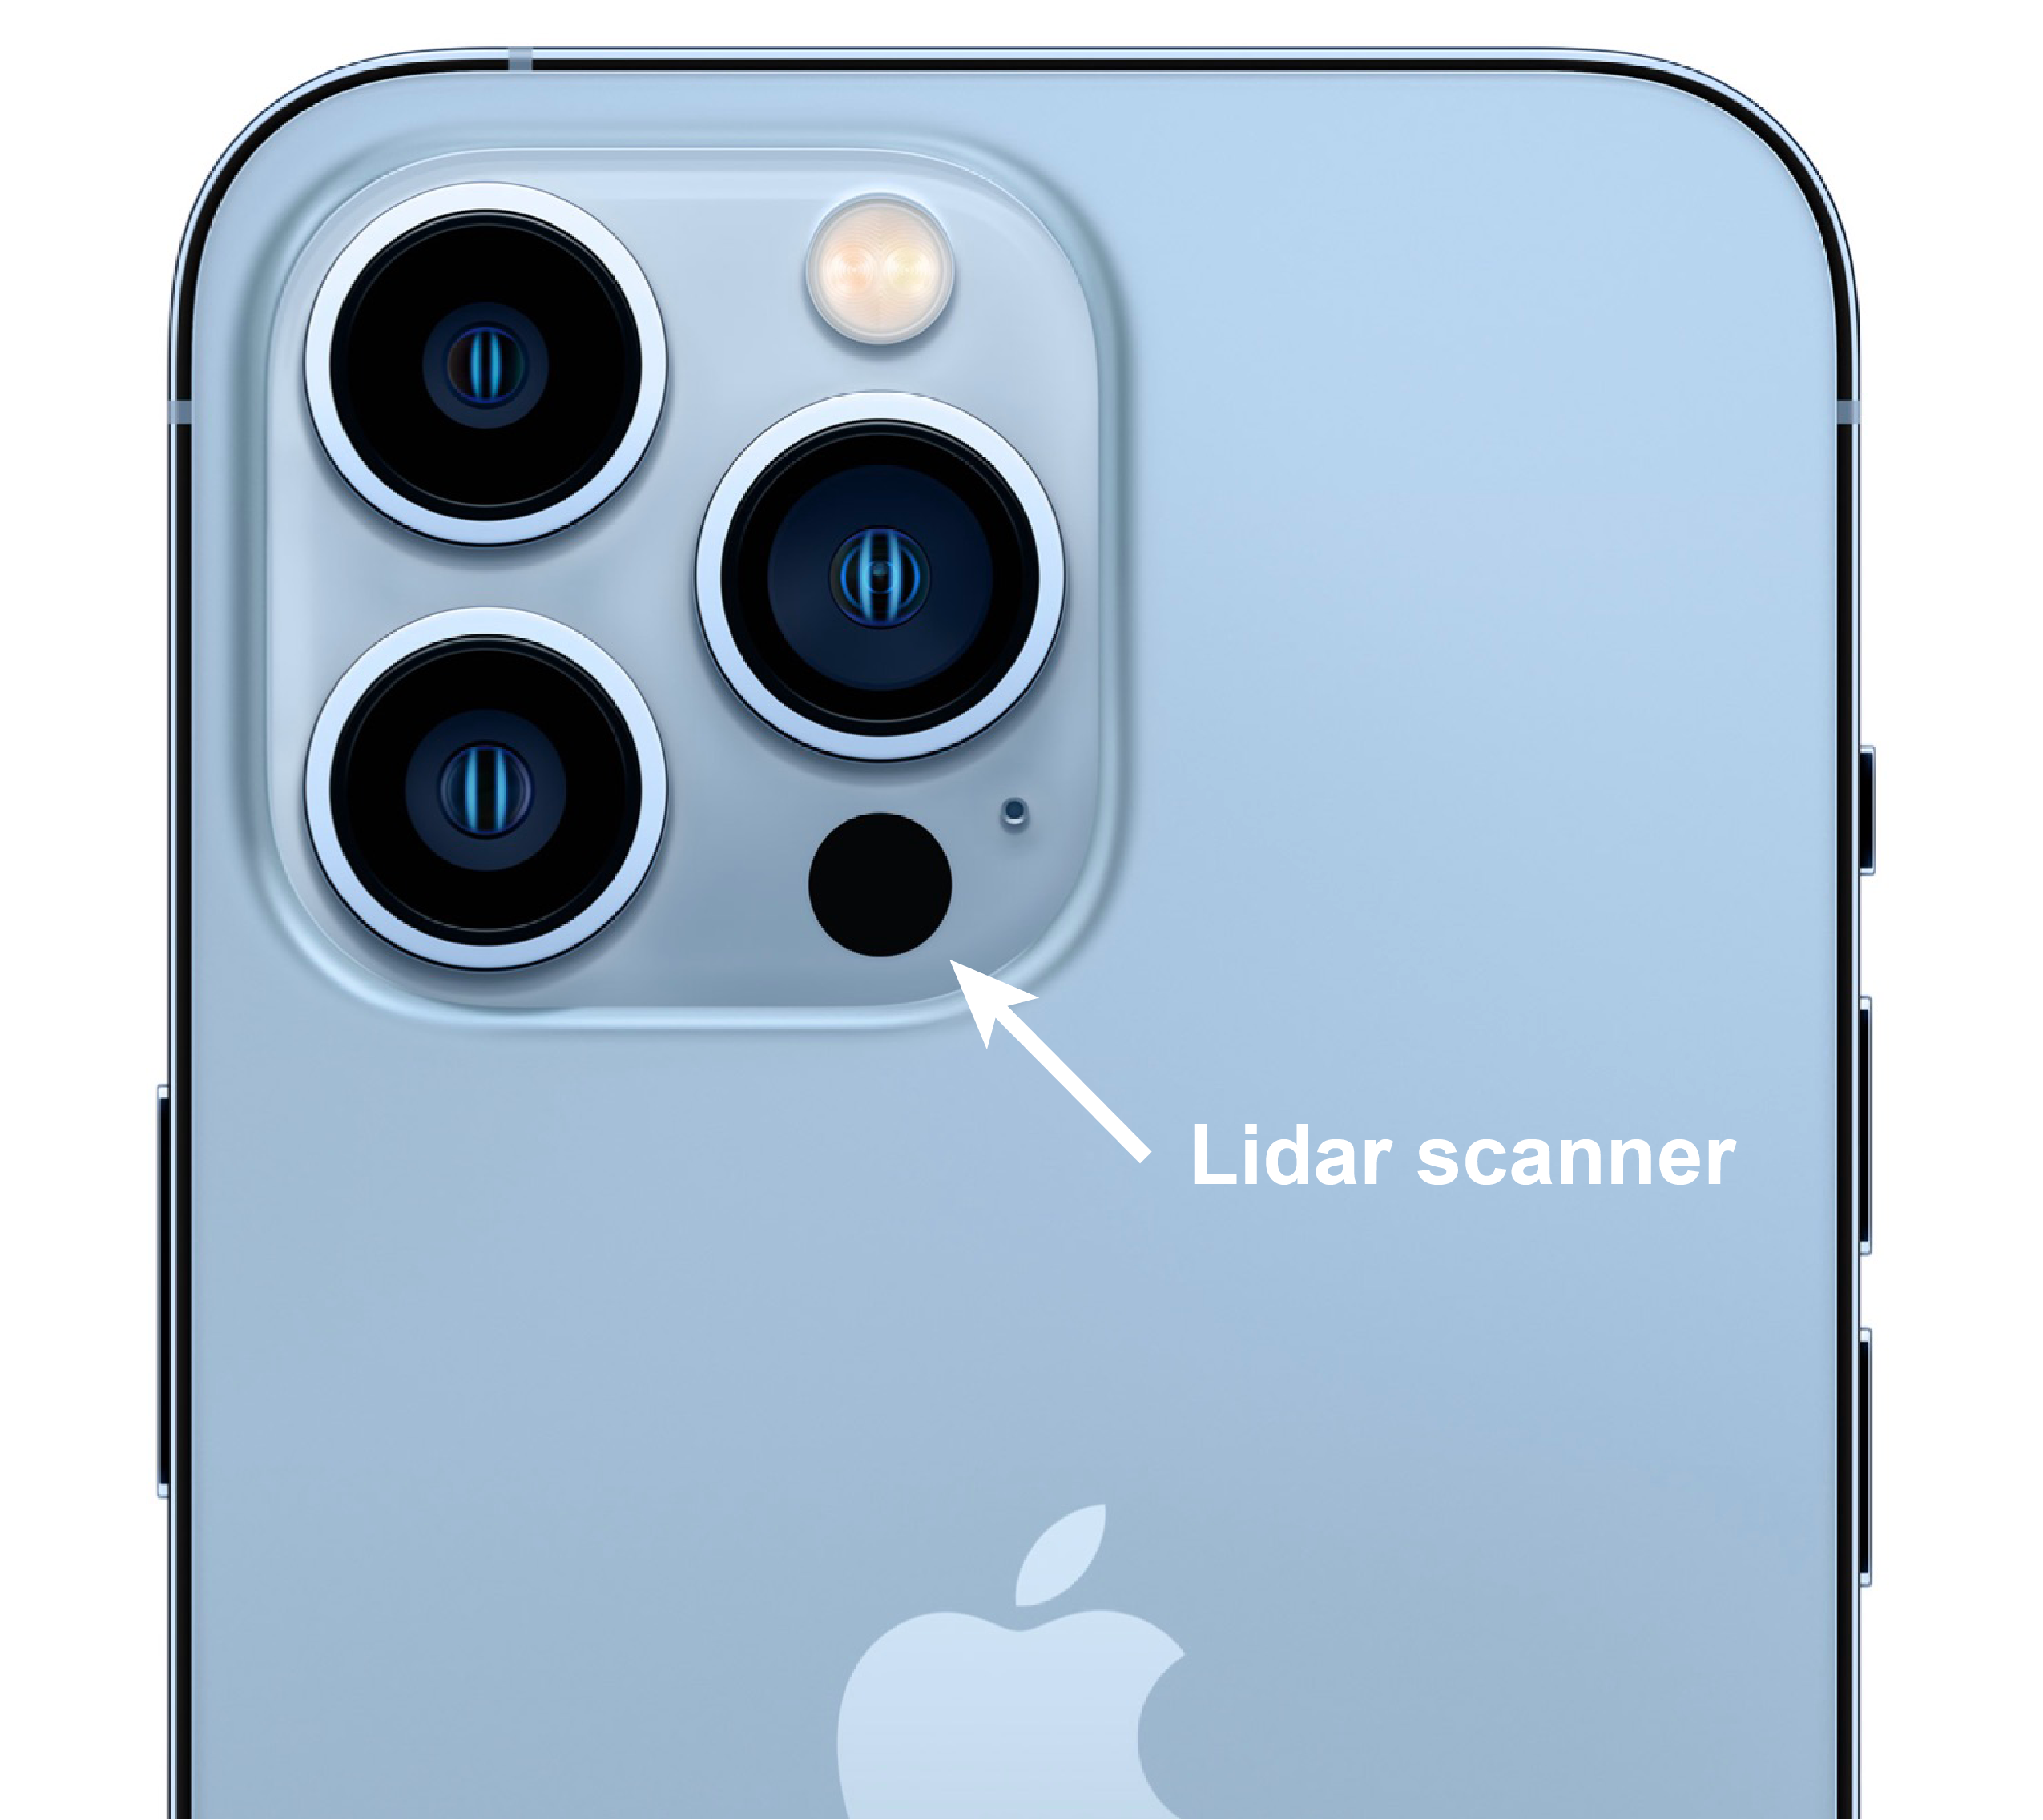 iPhone lidar applications for the geosciences | OpenTopography